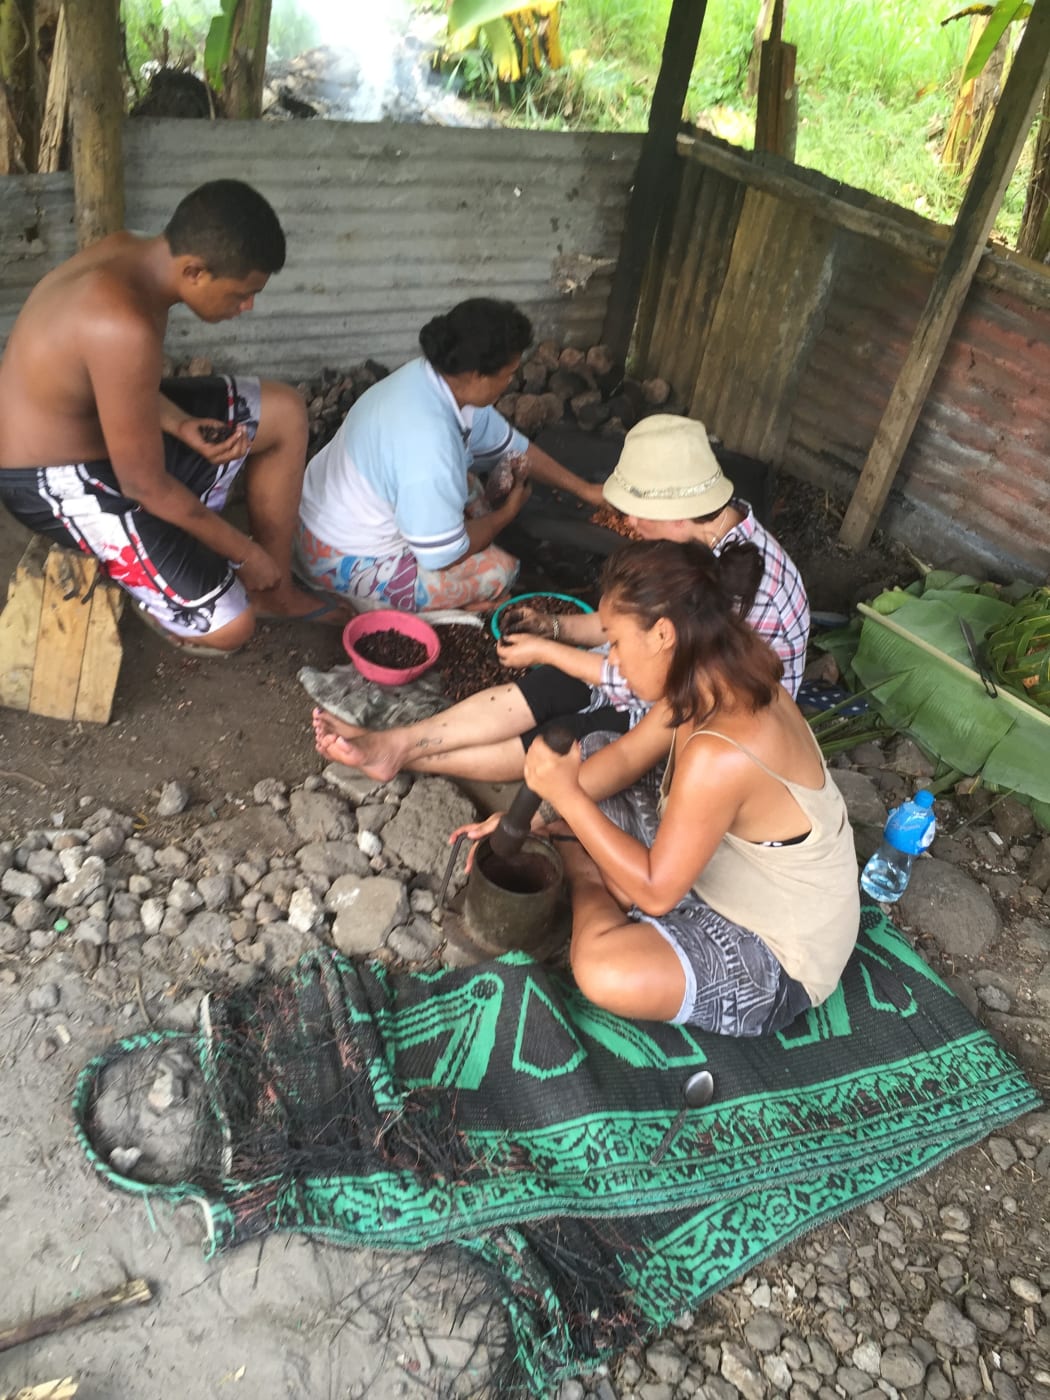 Mary Tiumalu working with a family in Samoa.